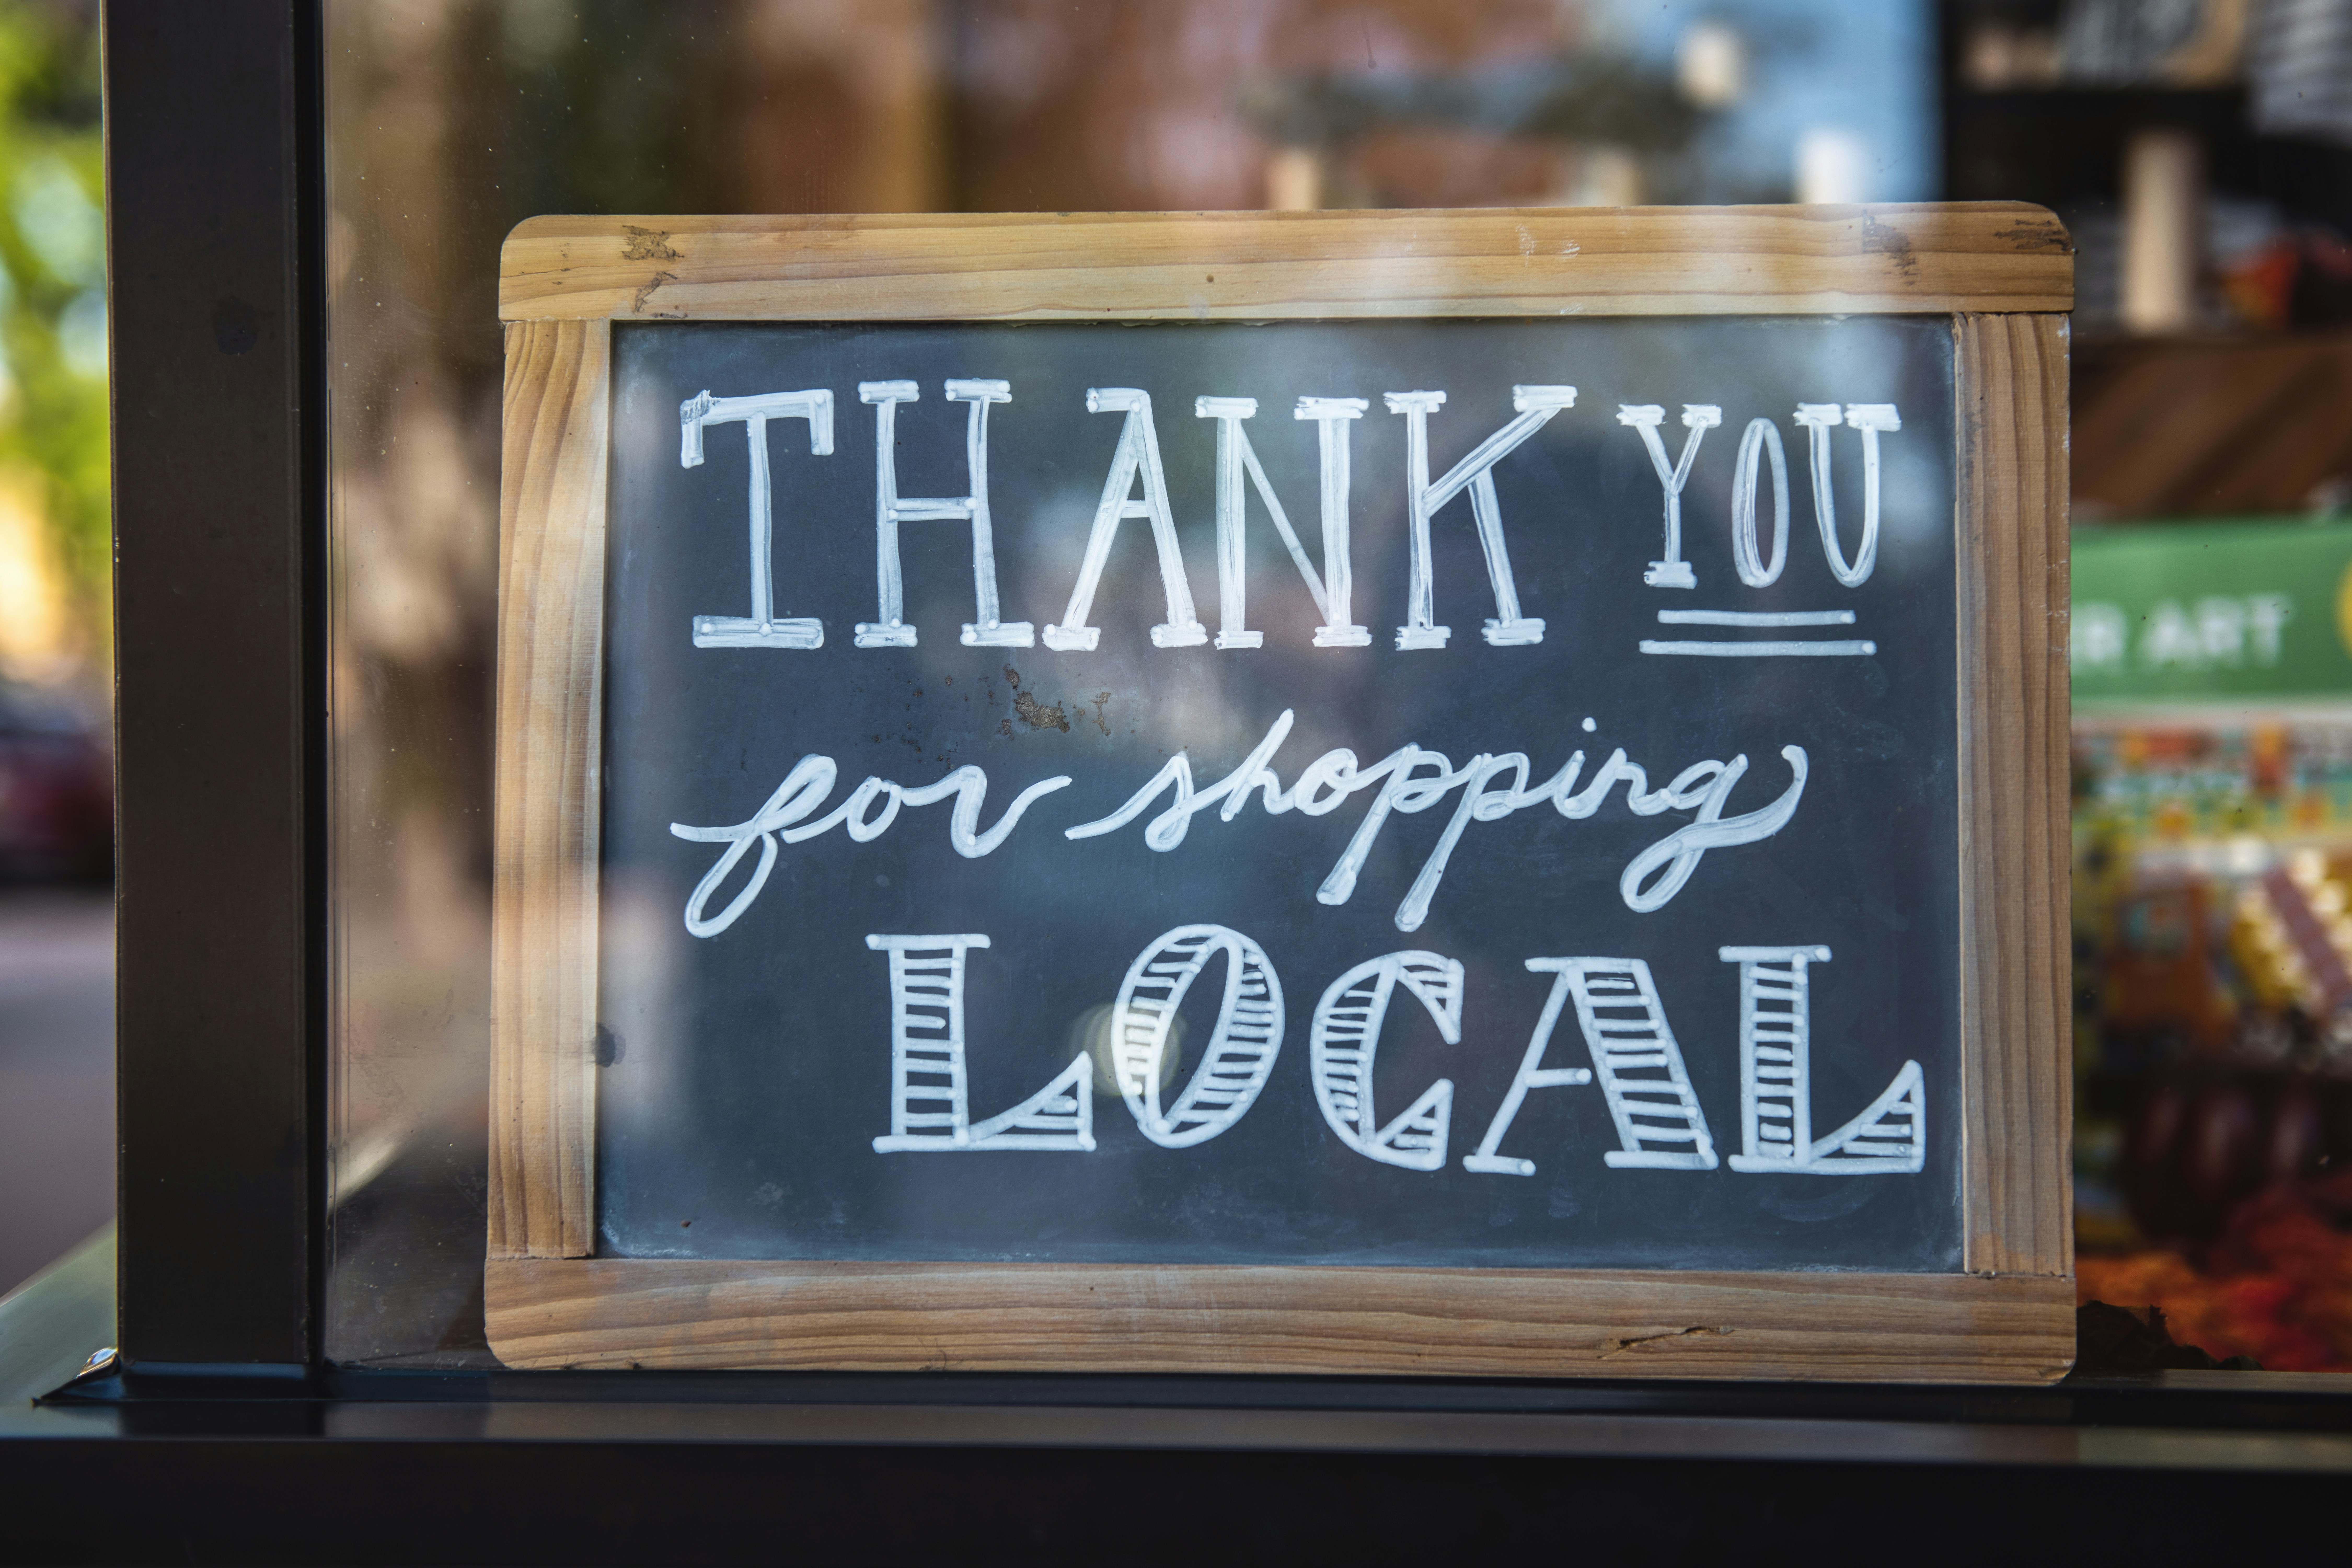 Small wooden framed blackboard that says "Thank you for shopping local" in white chalk.